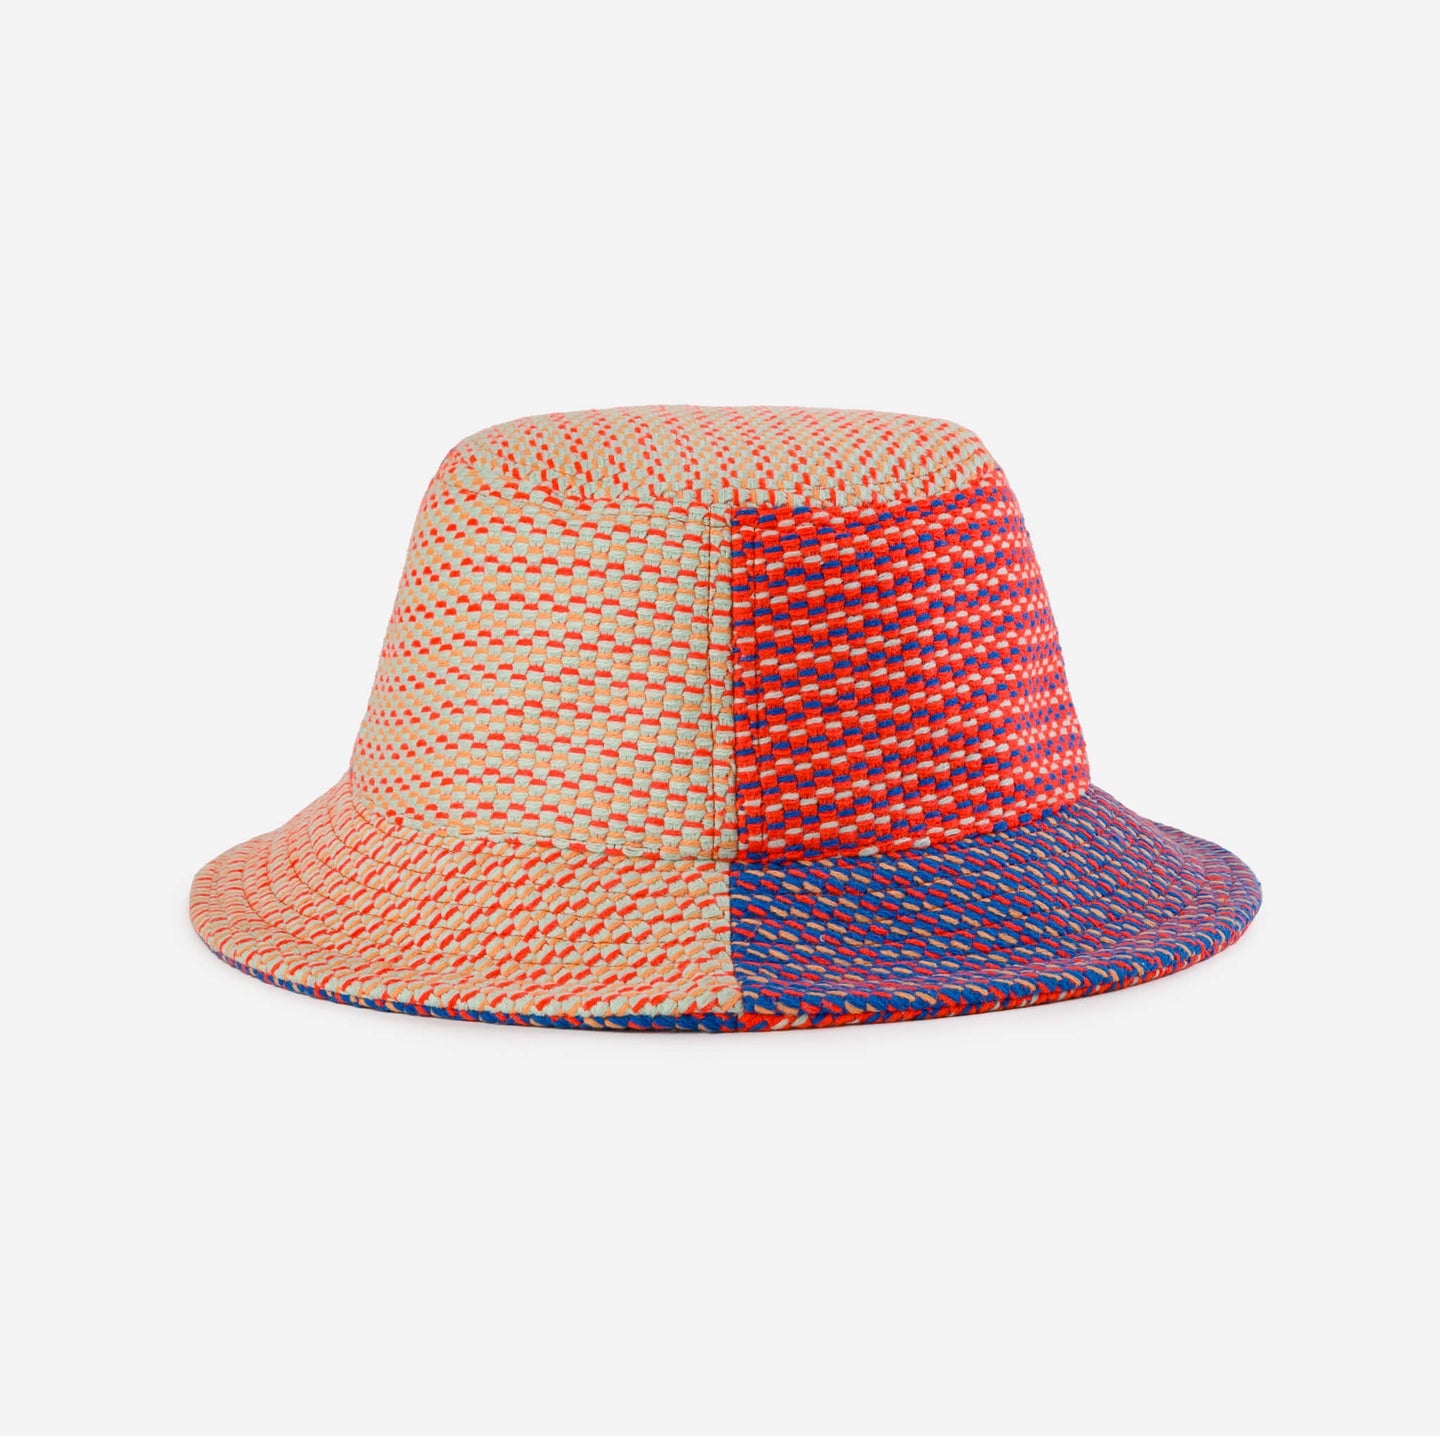 Dashes Knit soft bucket hat woven texture colorblock